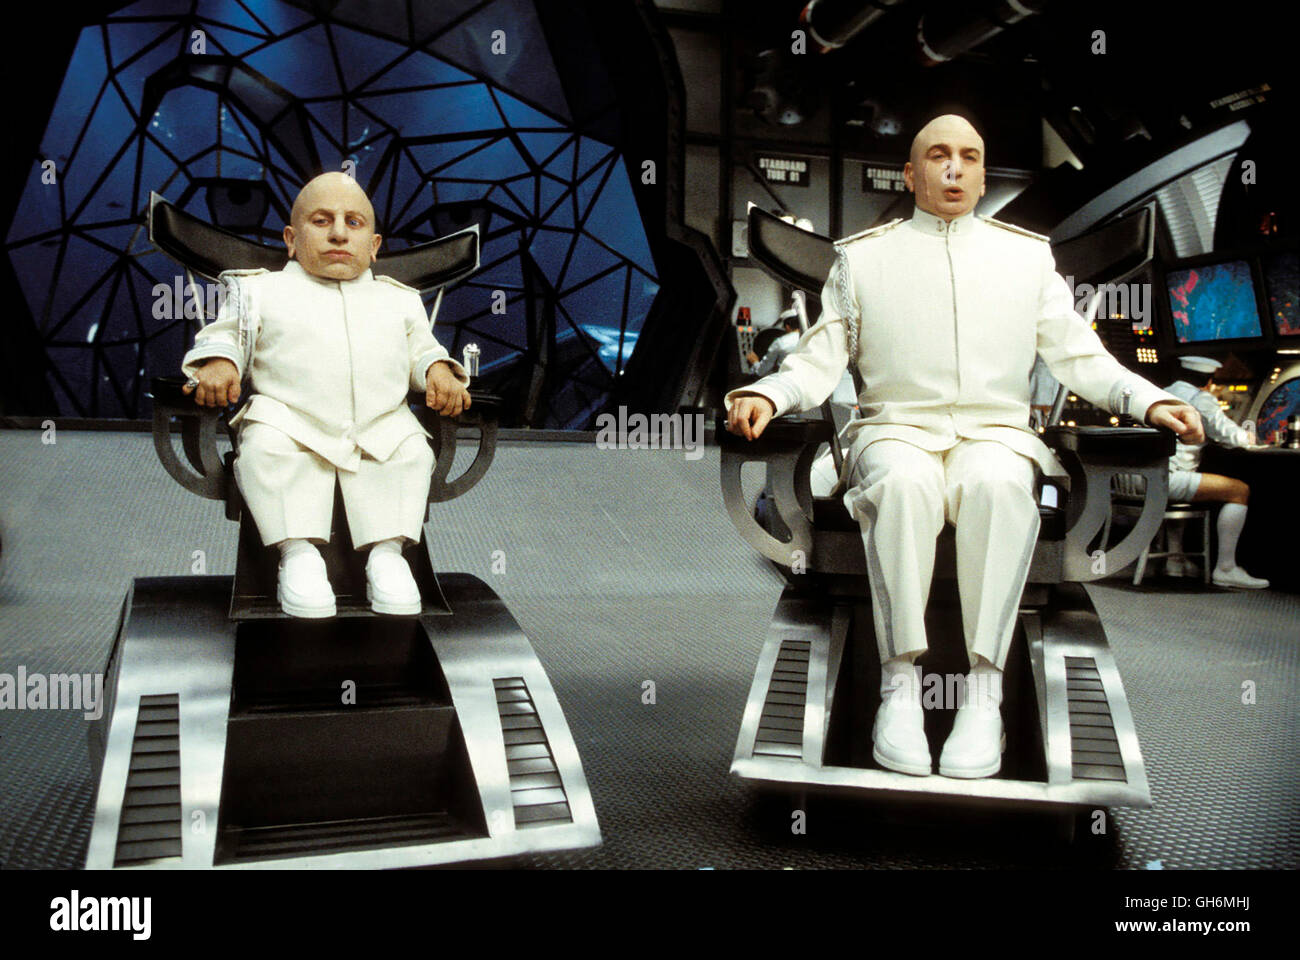 AUSTIN POWERS IN GOLDSTÄNDER / Austin Powers in Goldmember USA 2002 / Jay Roach Mini Me (VERNE TROYER), Dr. Evil (MIKE MYERS) Regie: Jay Roach aka. Austin Powers in Goldmember Stock Photo